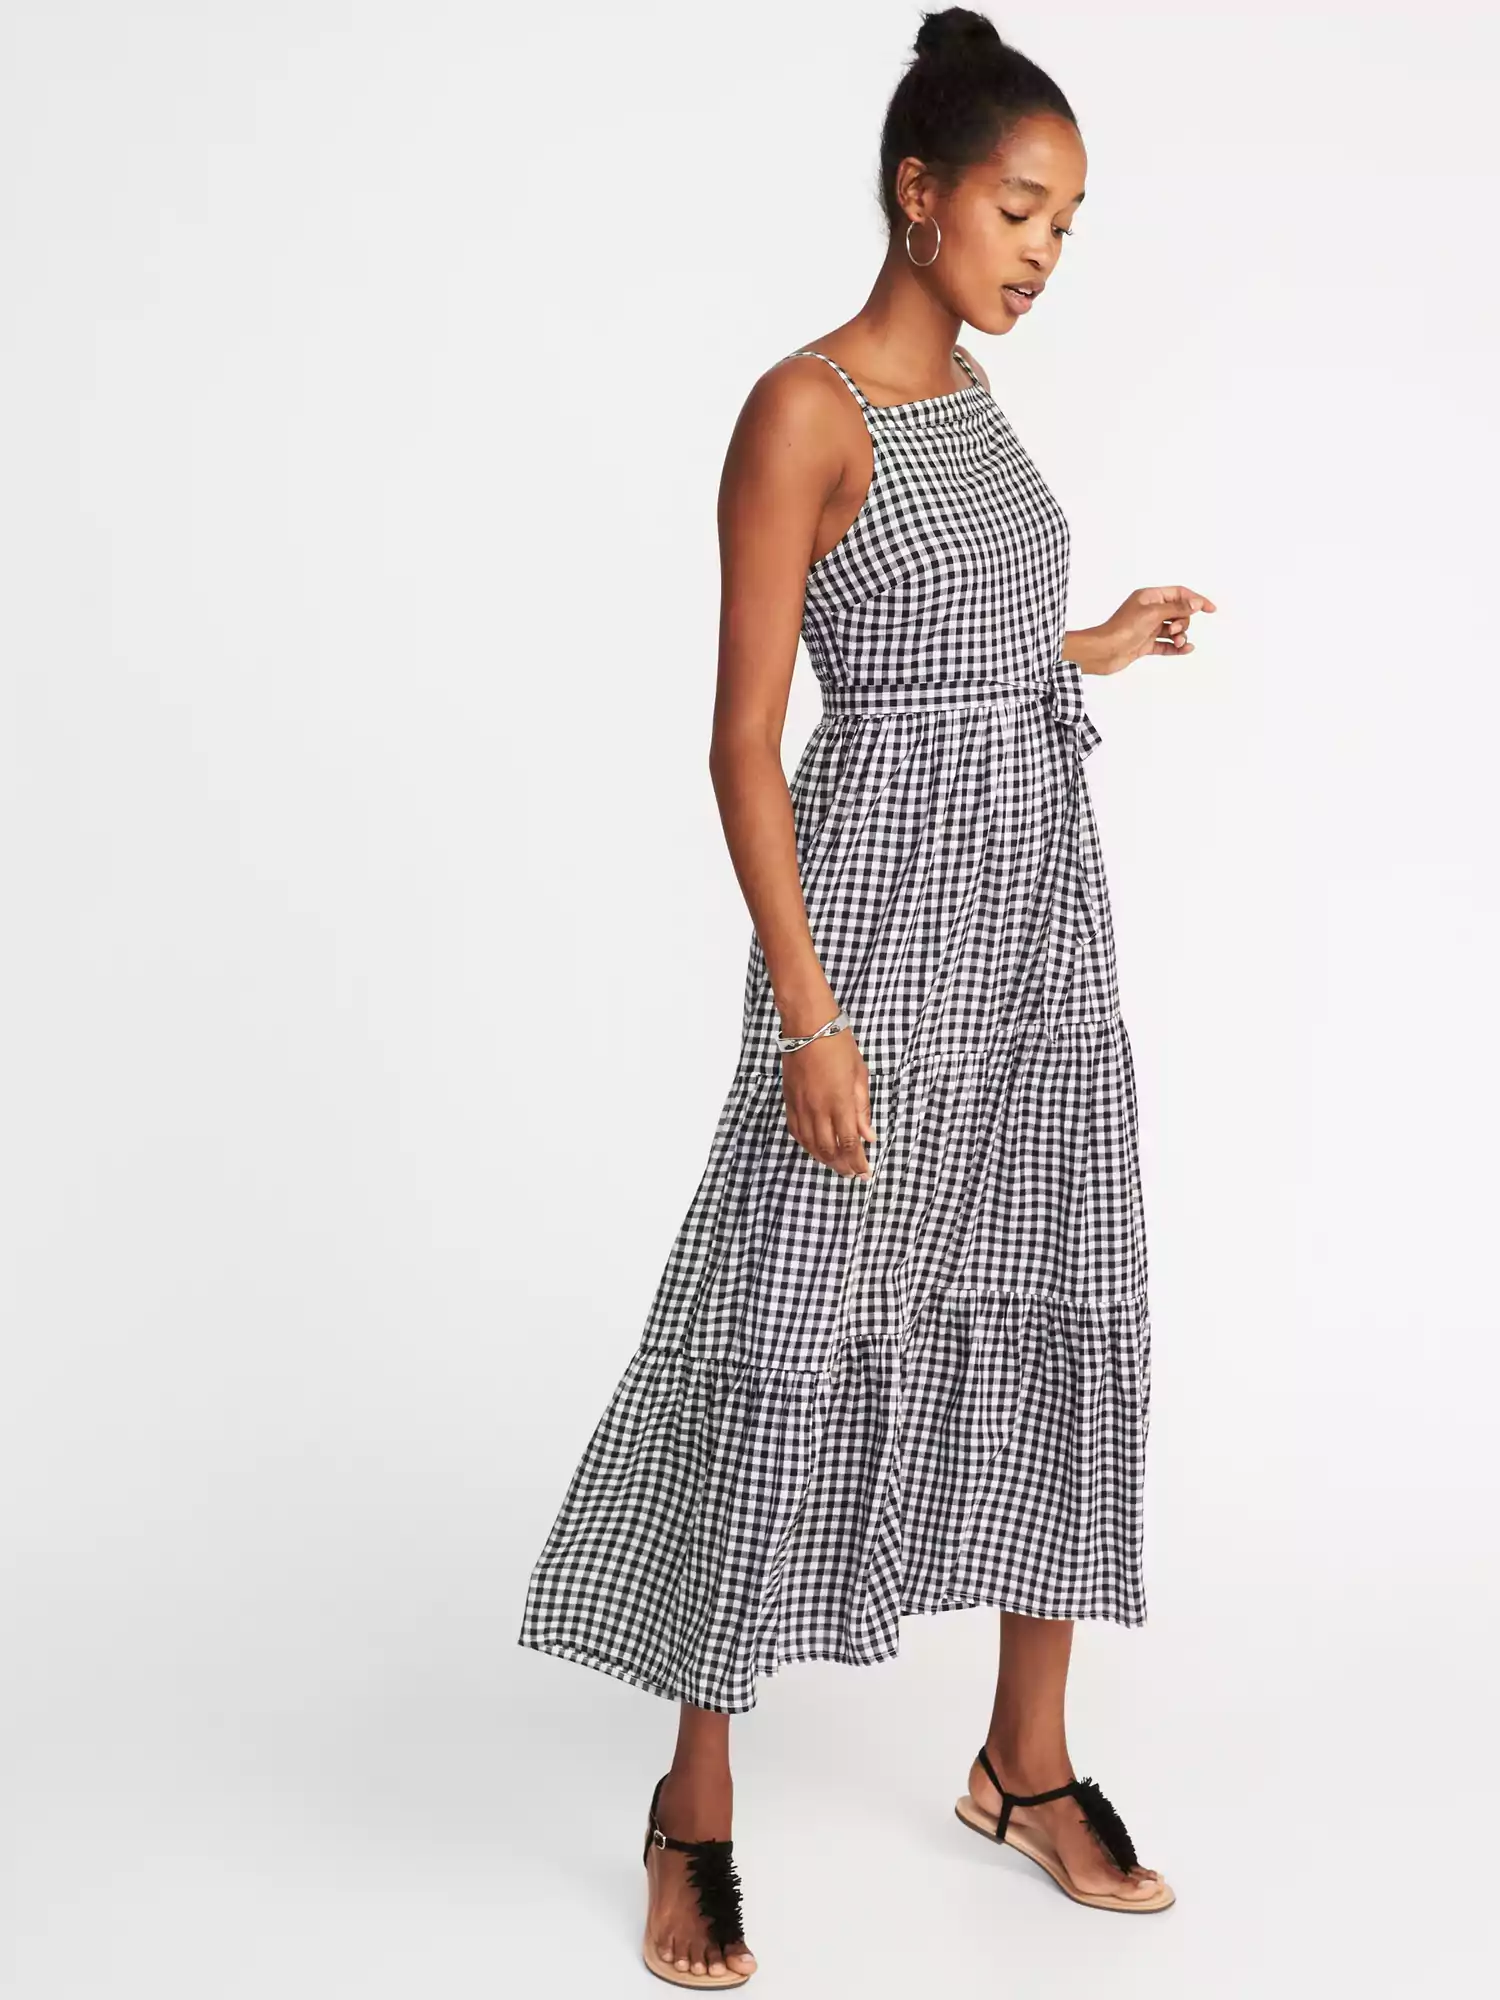 20 under-$125 dresses to show off in